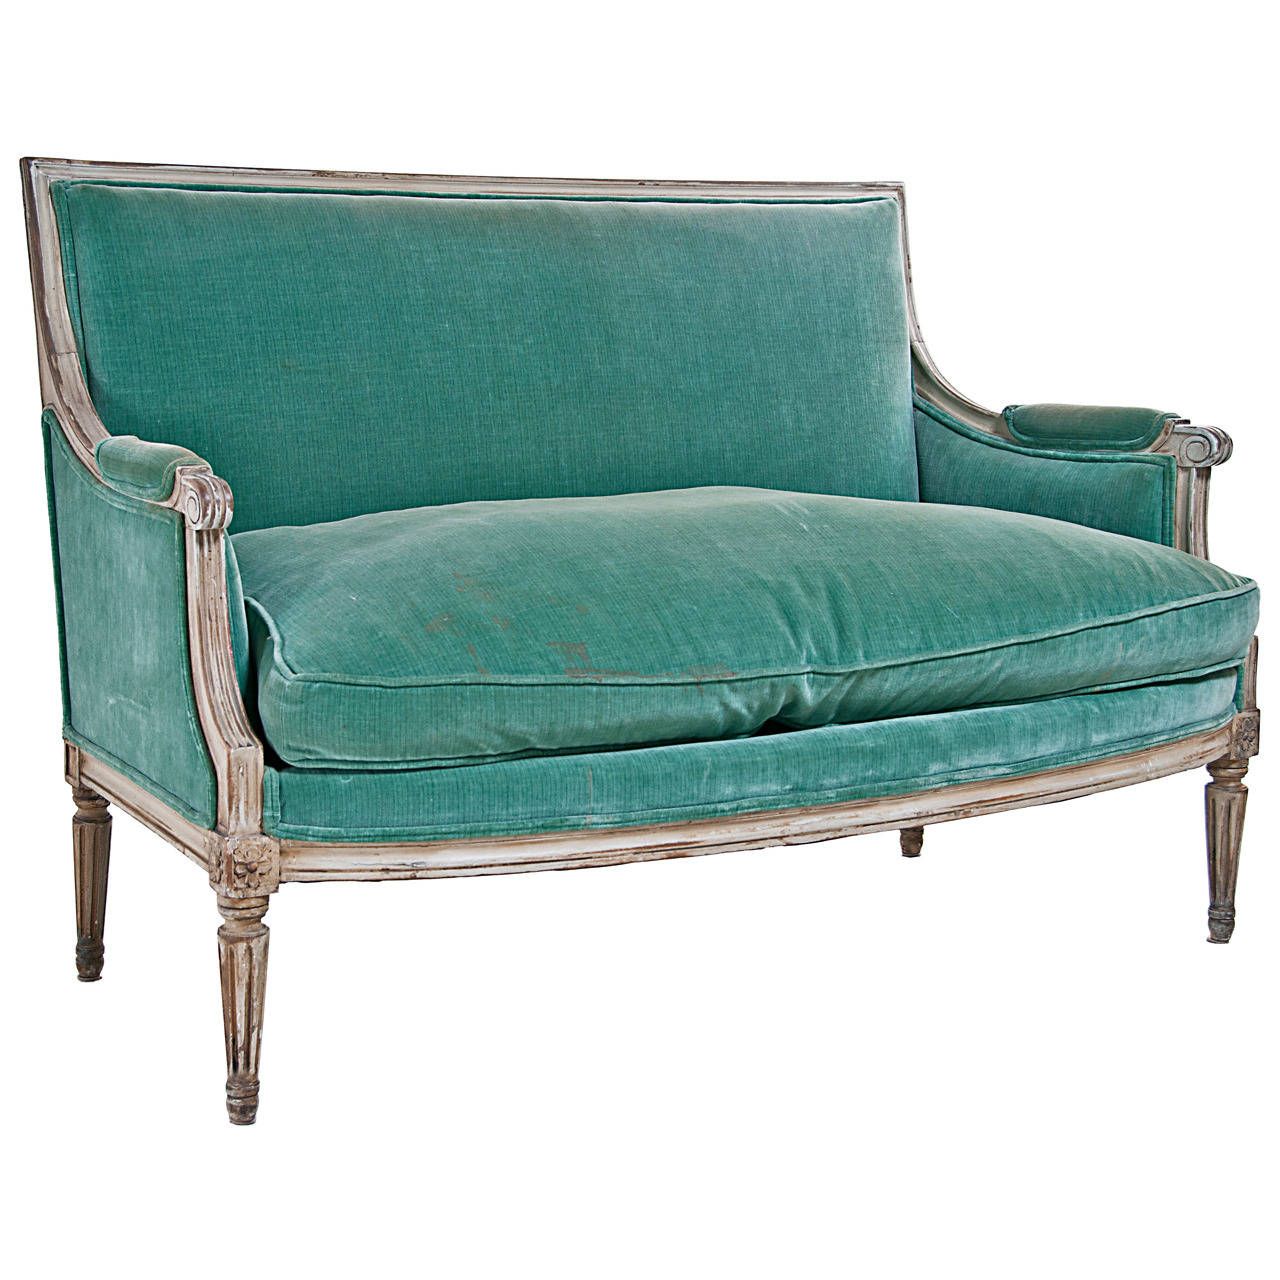 Antique and Vintage Sofas - 9,700 For Sale at 1stdibs